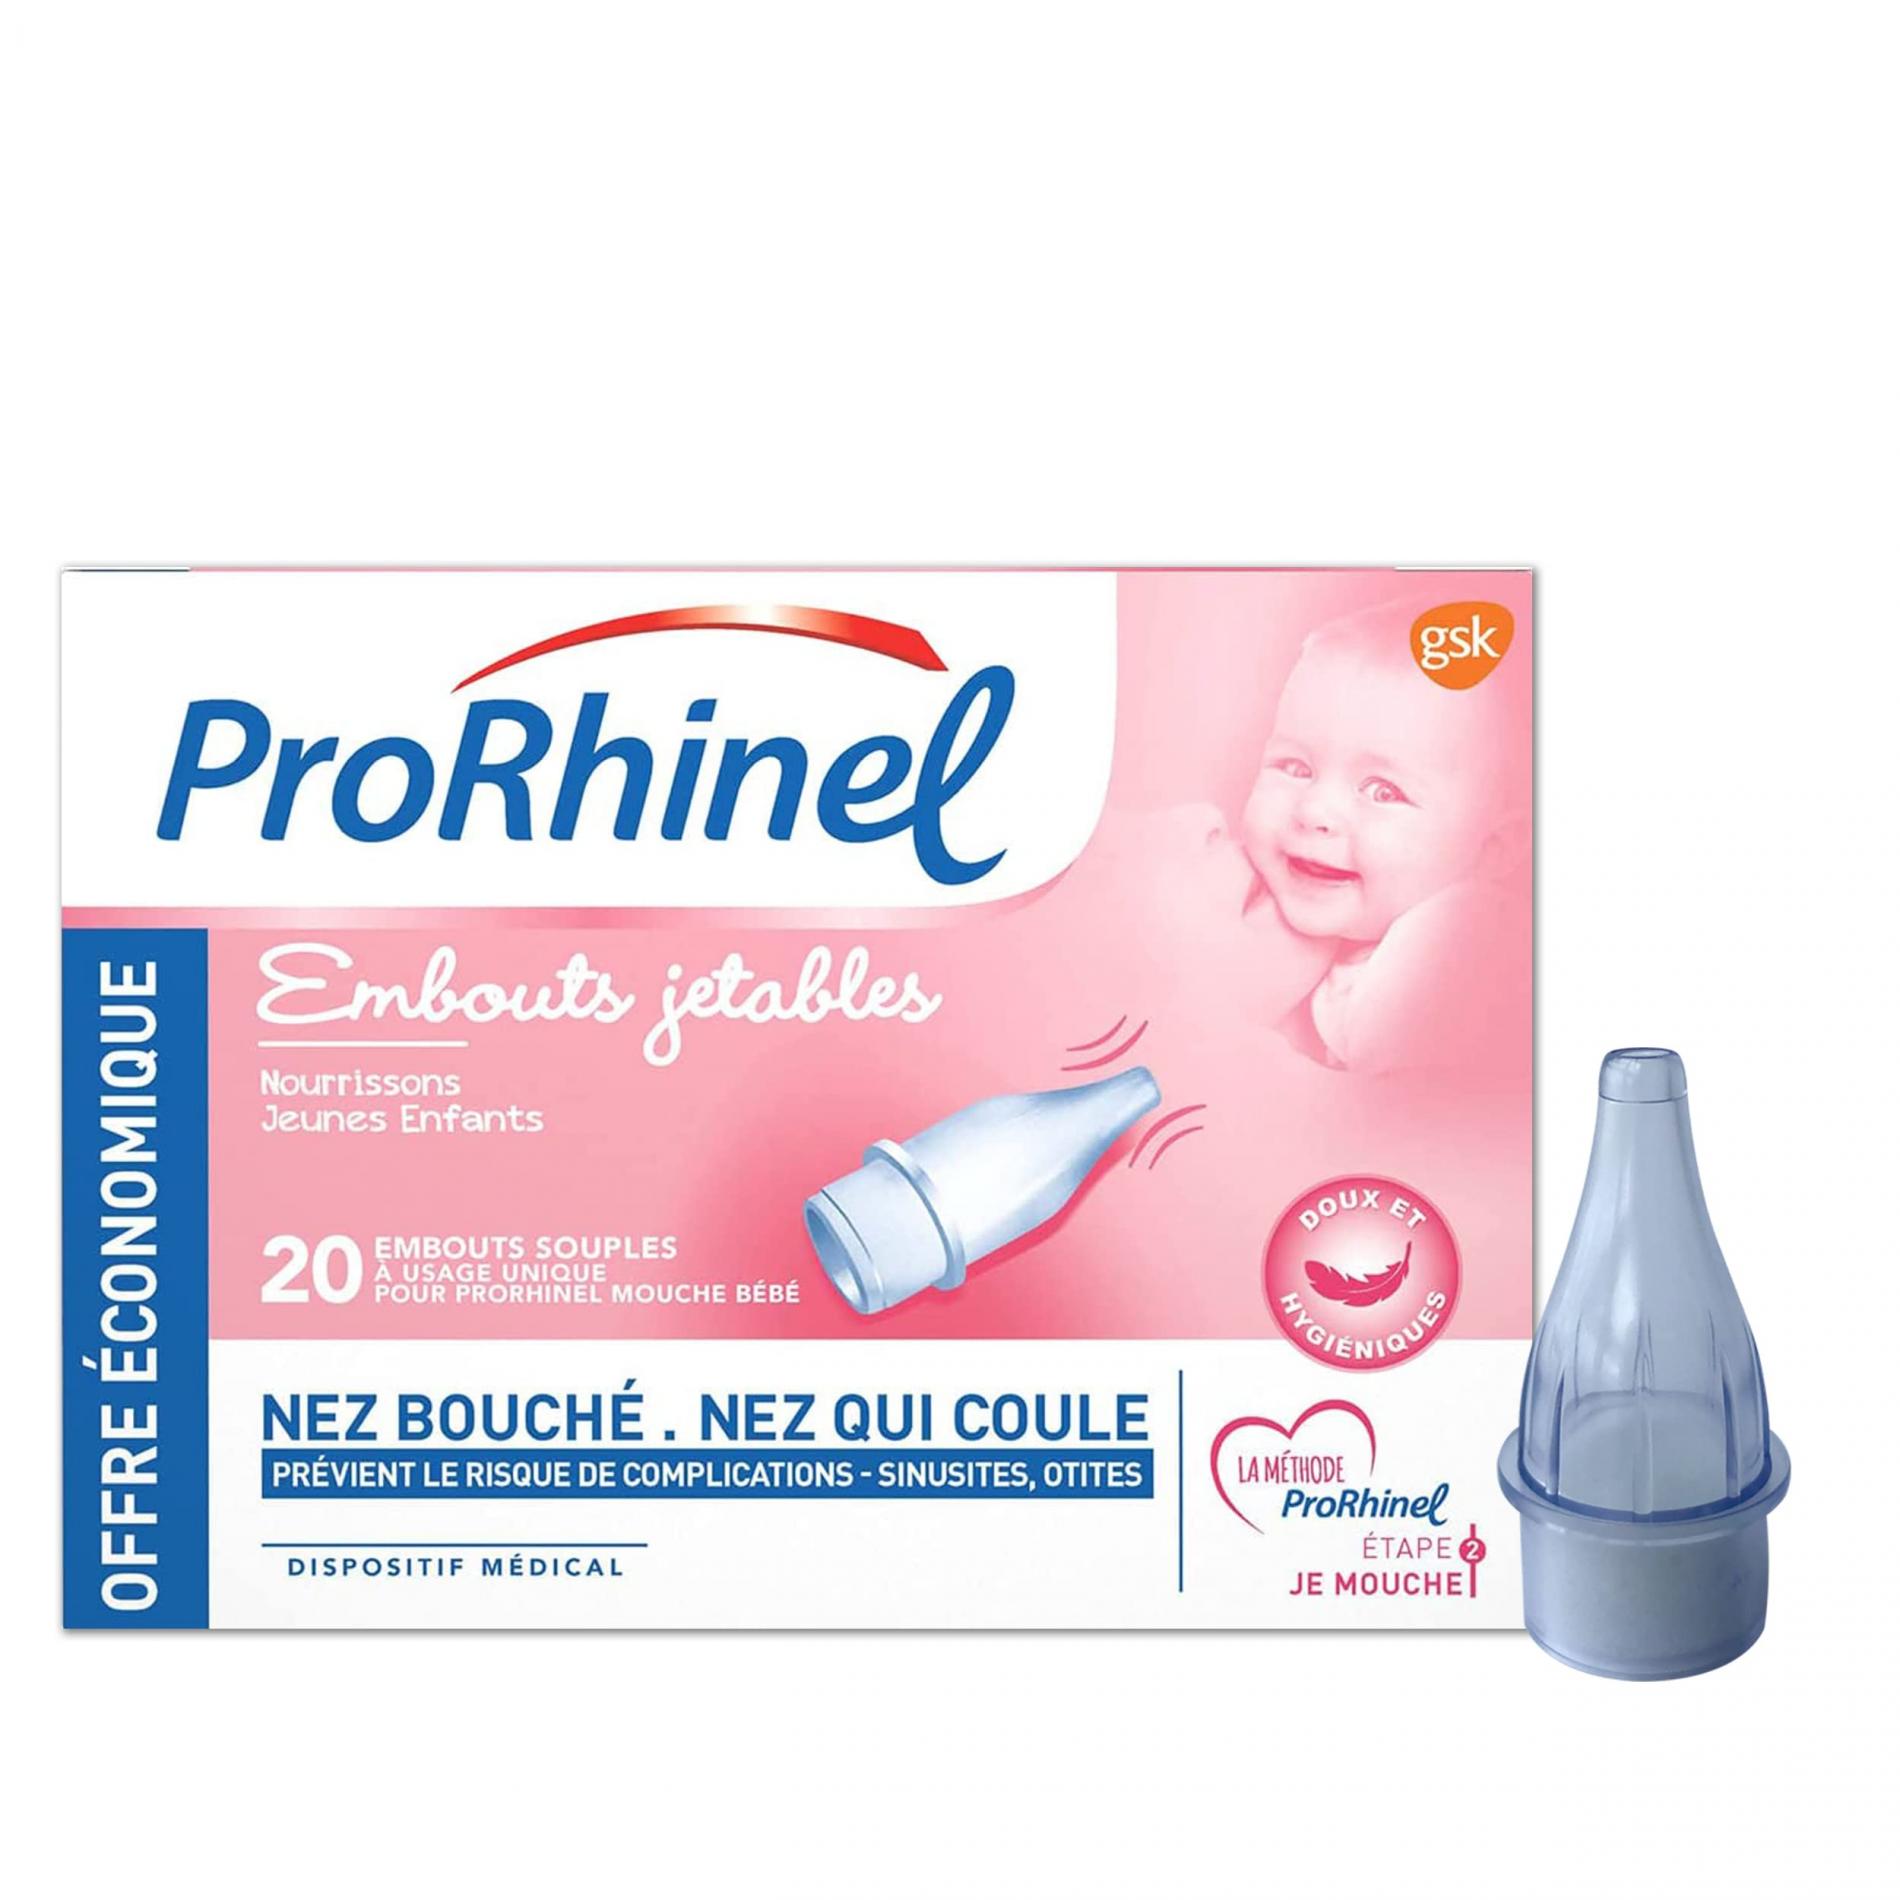 ProRhinel embouts jetables